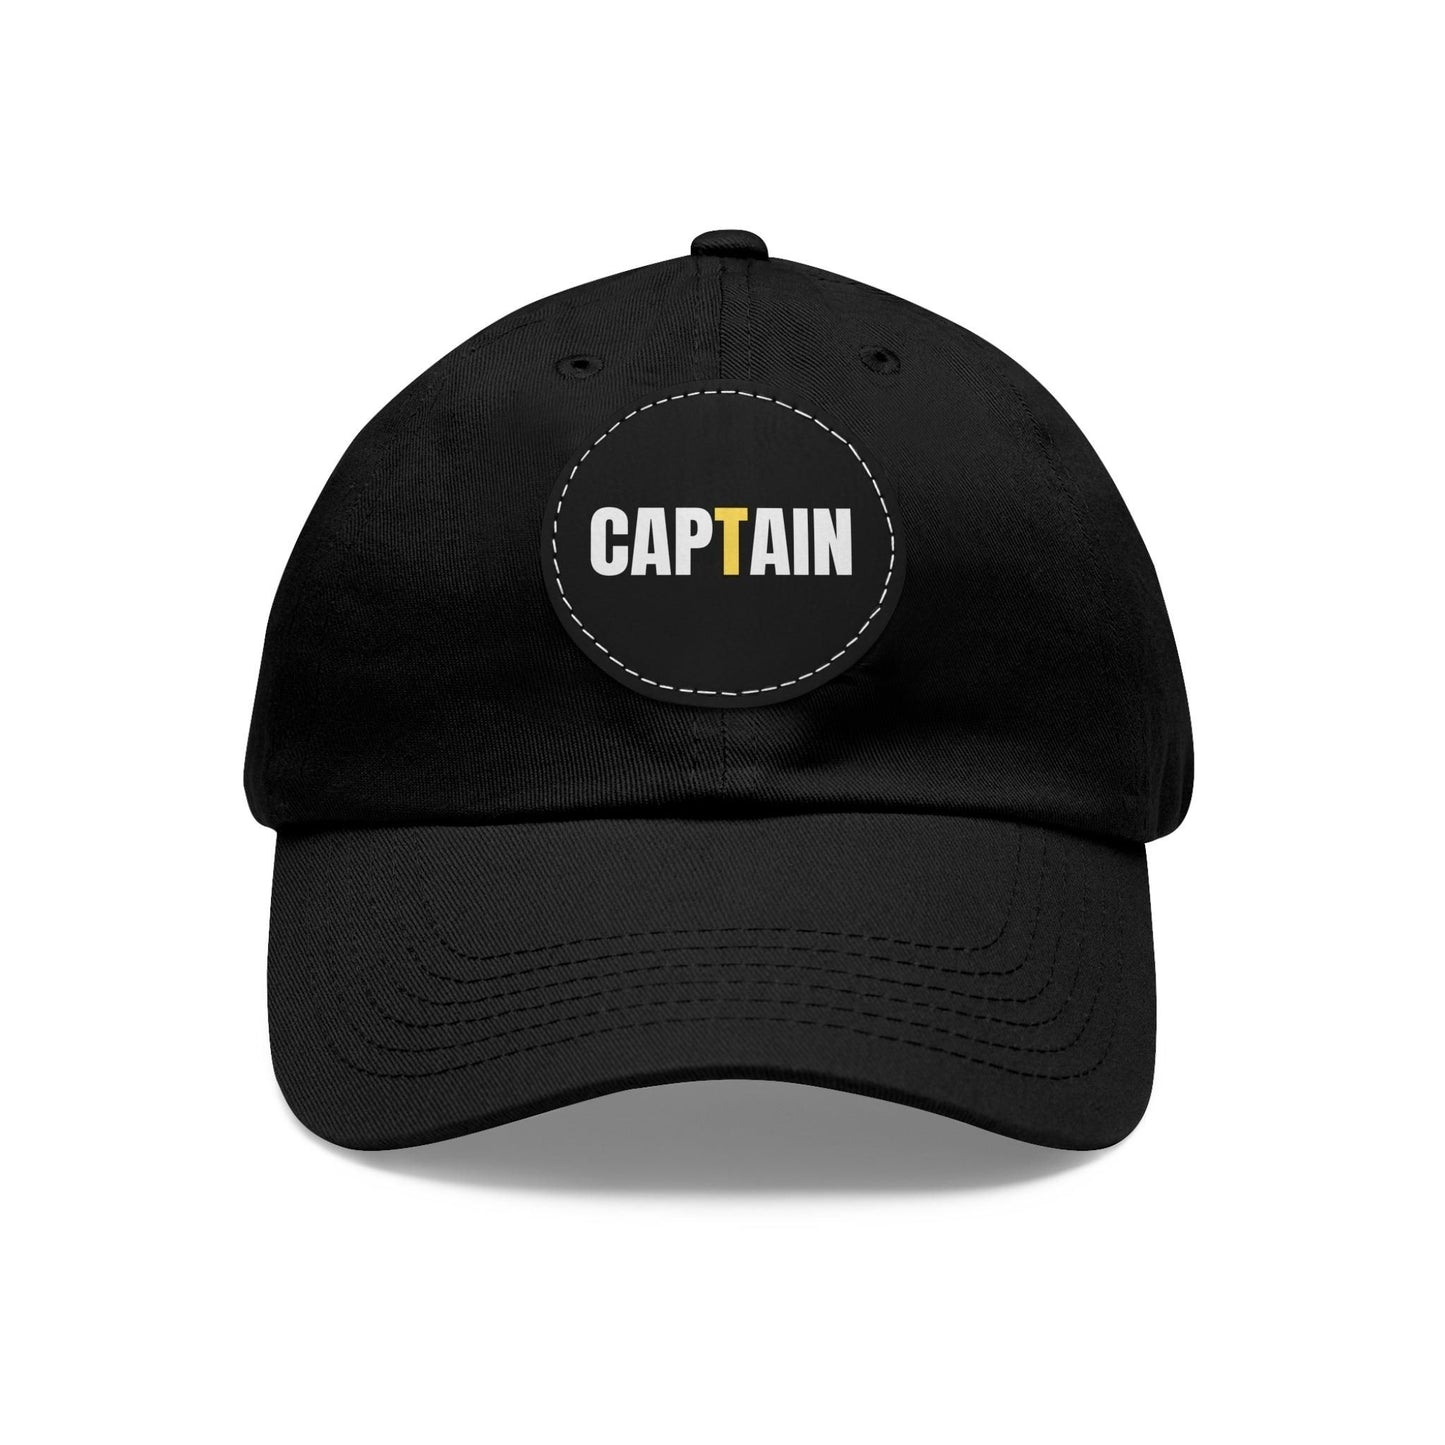 Captain Baseball Hat with Leather Patch Cap Black / Black patch Circle One size